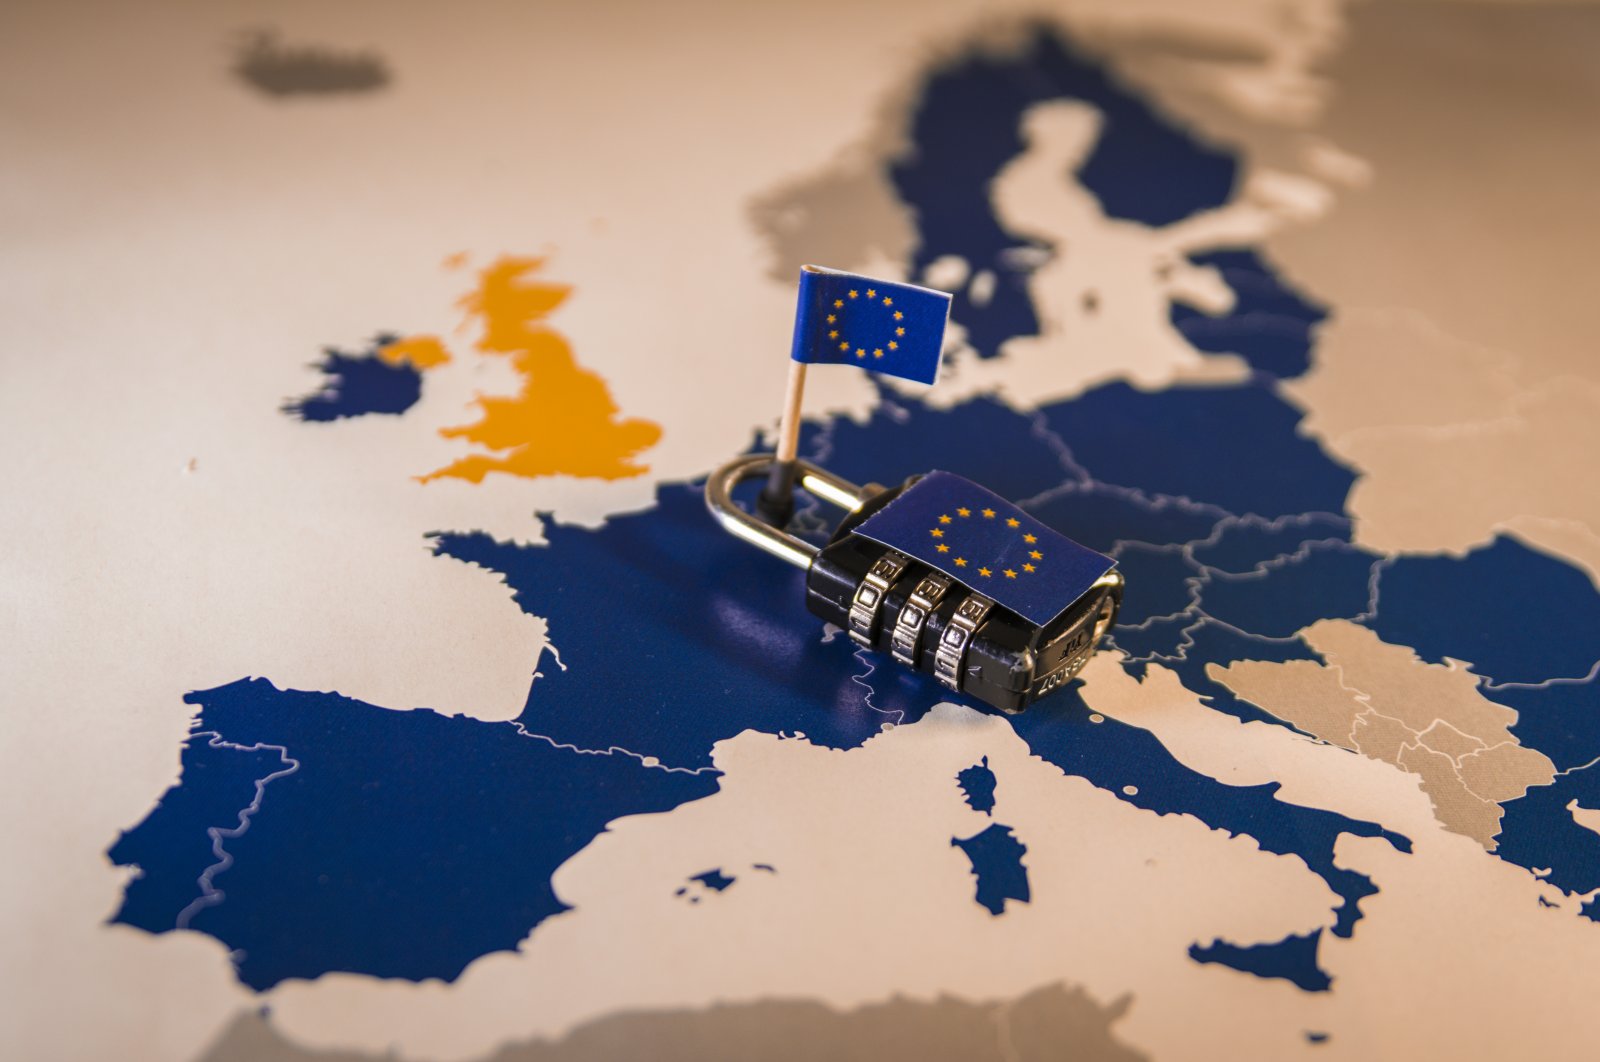 An illustration of a padlock over the European Union map. (Shutterstock Photo)